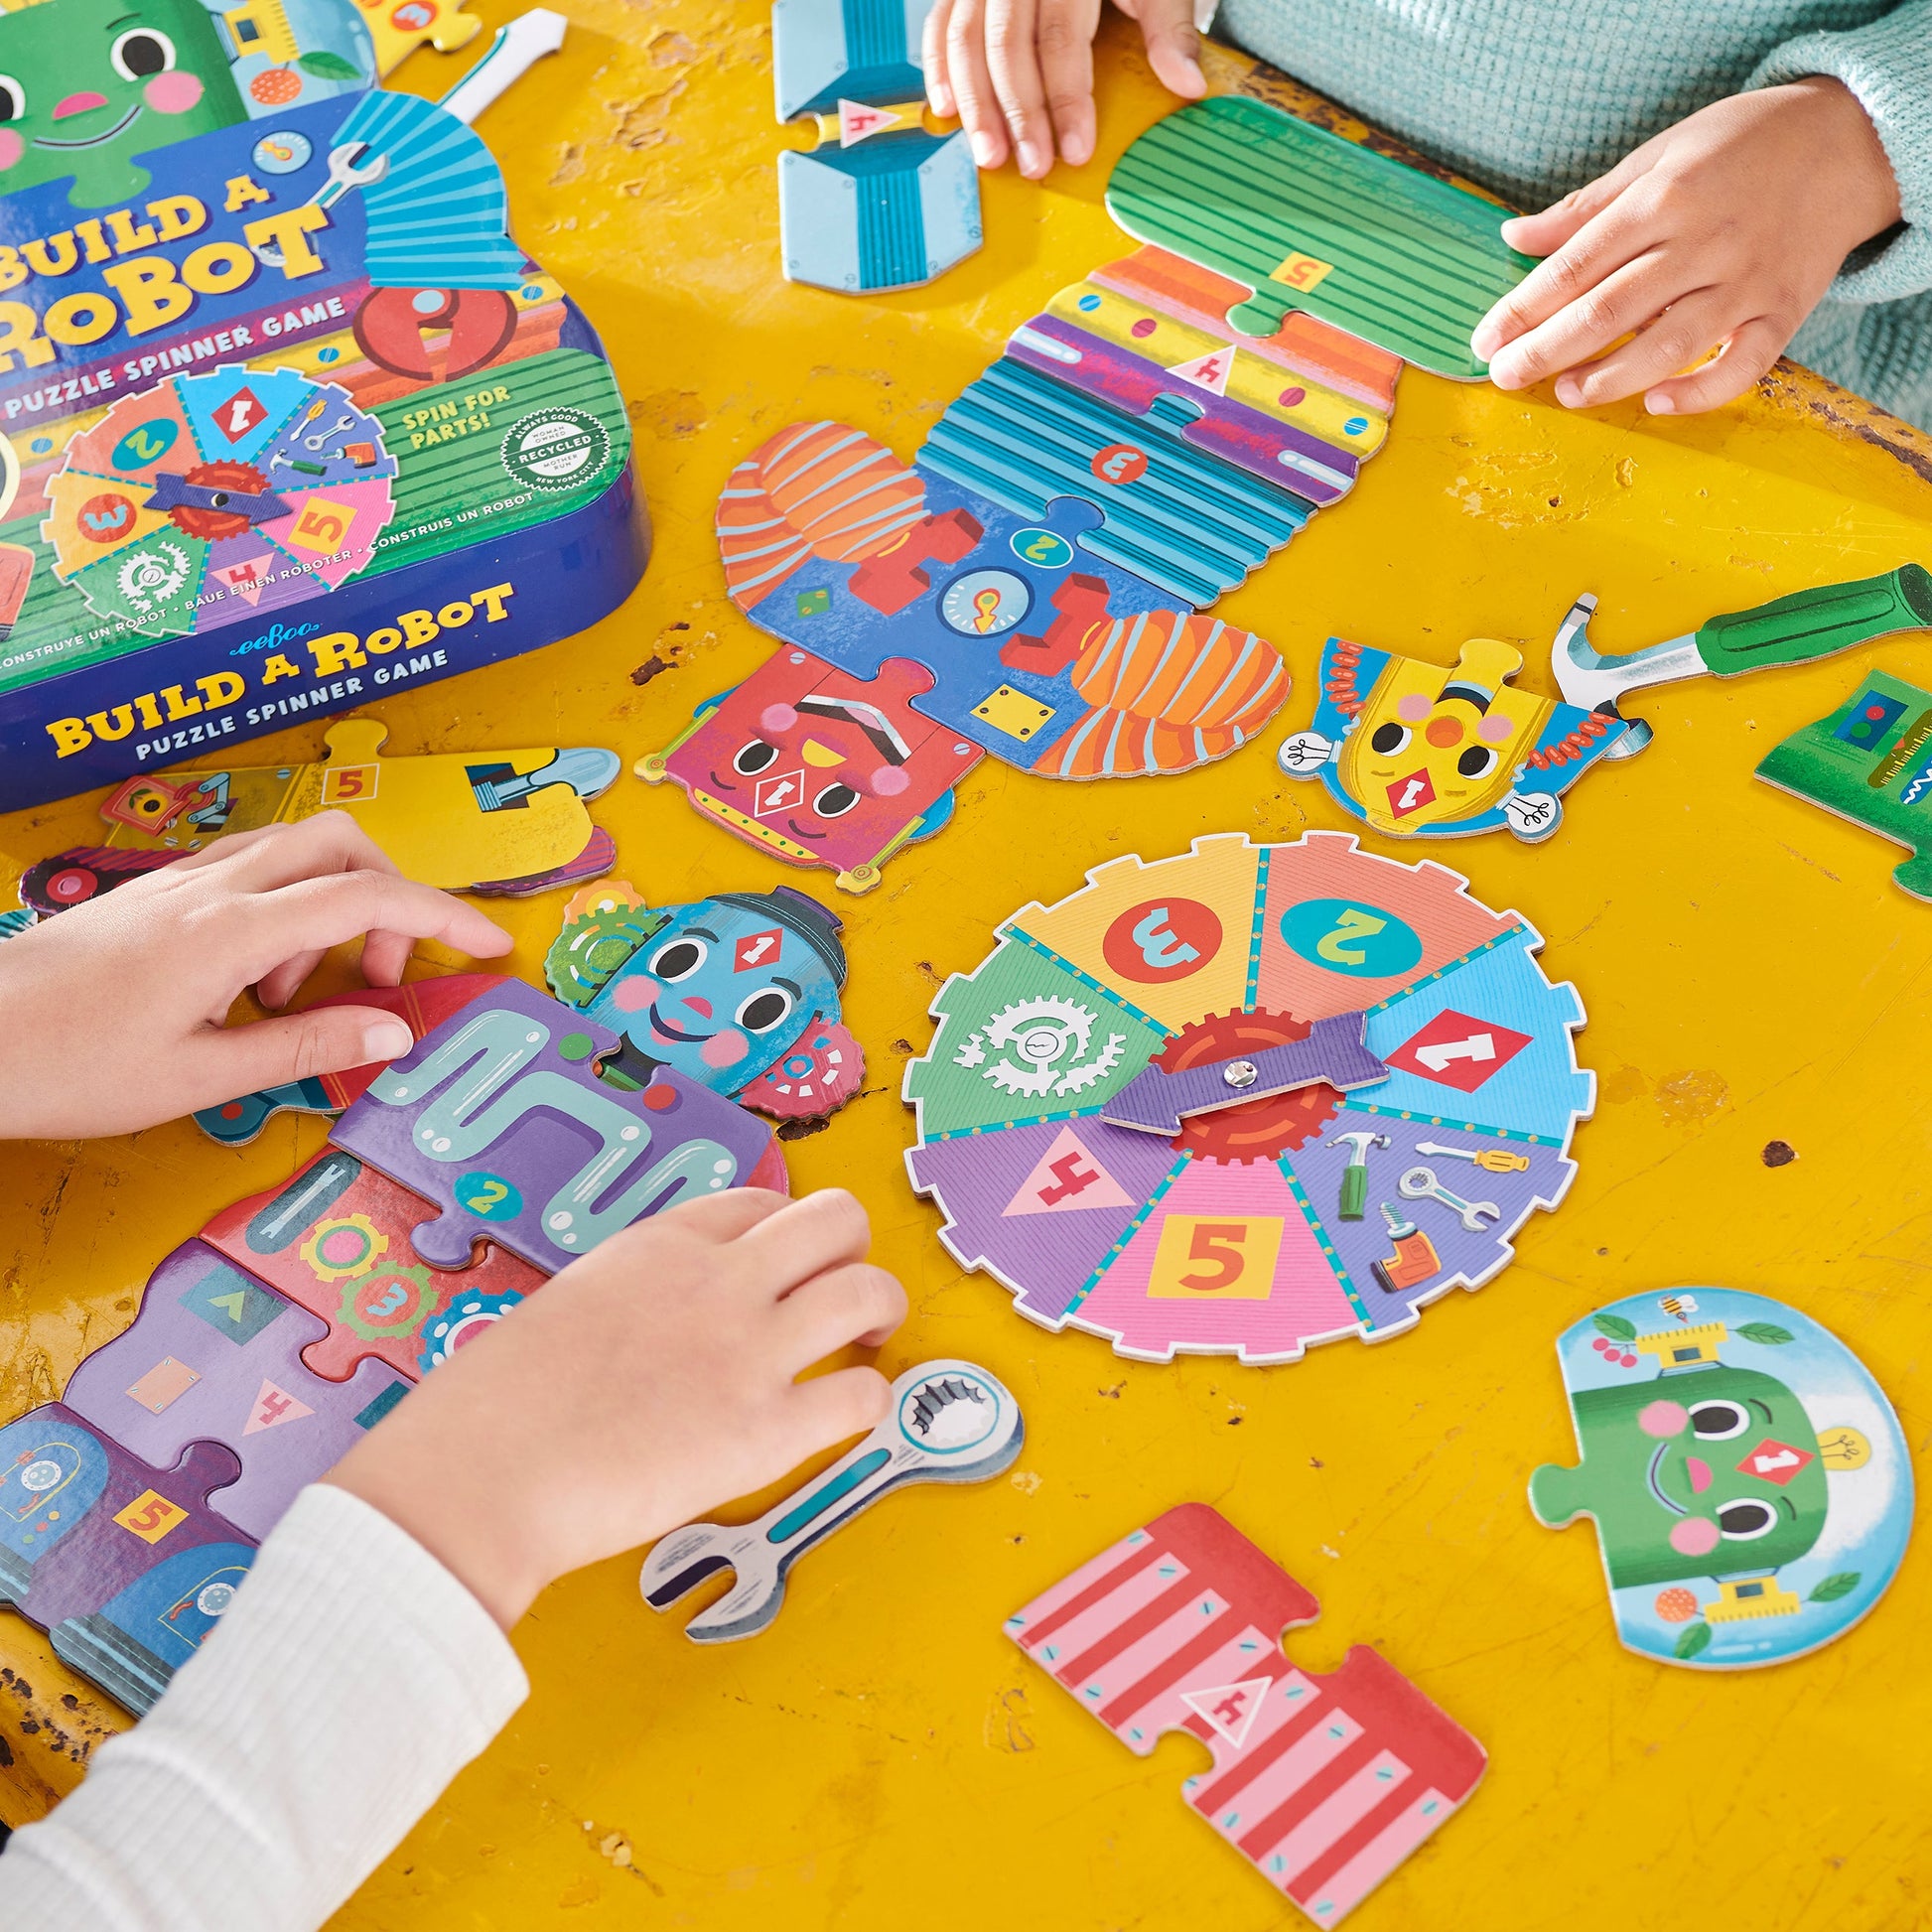 Build a Robot Award Winning Spinner Game by eeBoo | Unique Fun Gifts for Kids Ages 3 & Up